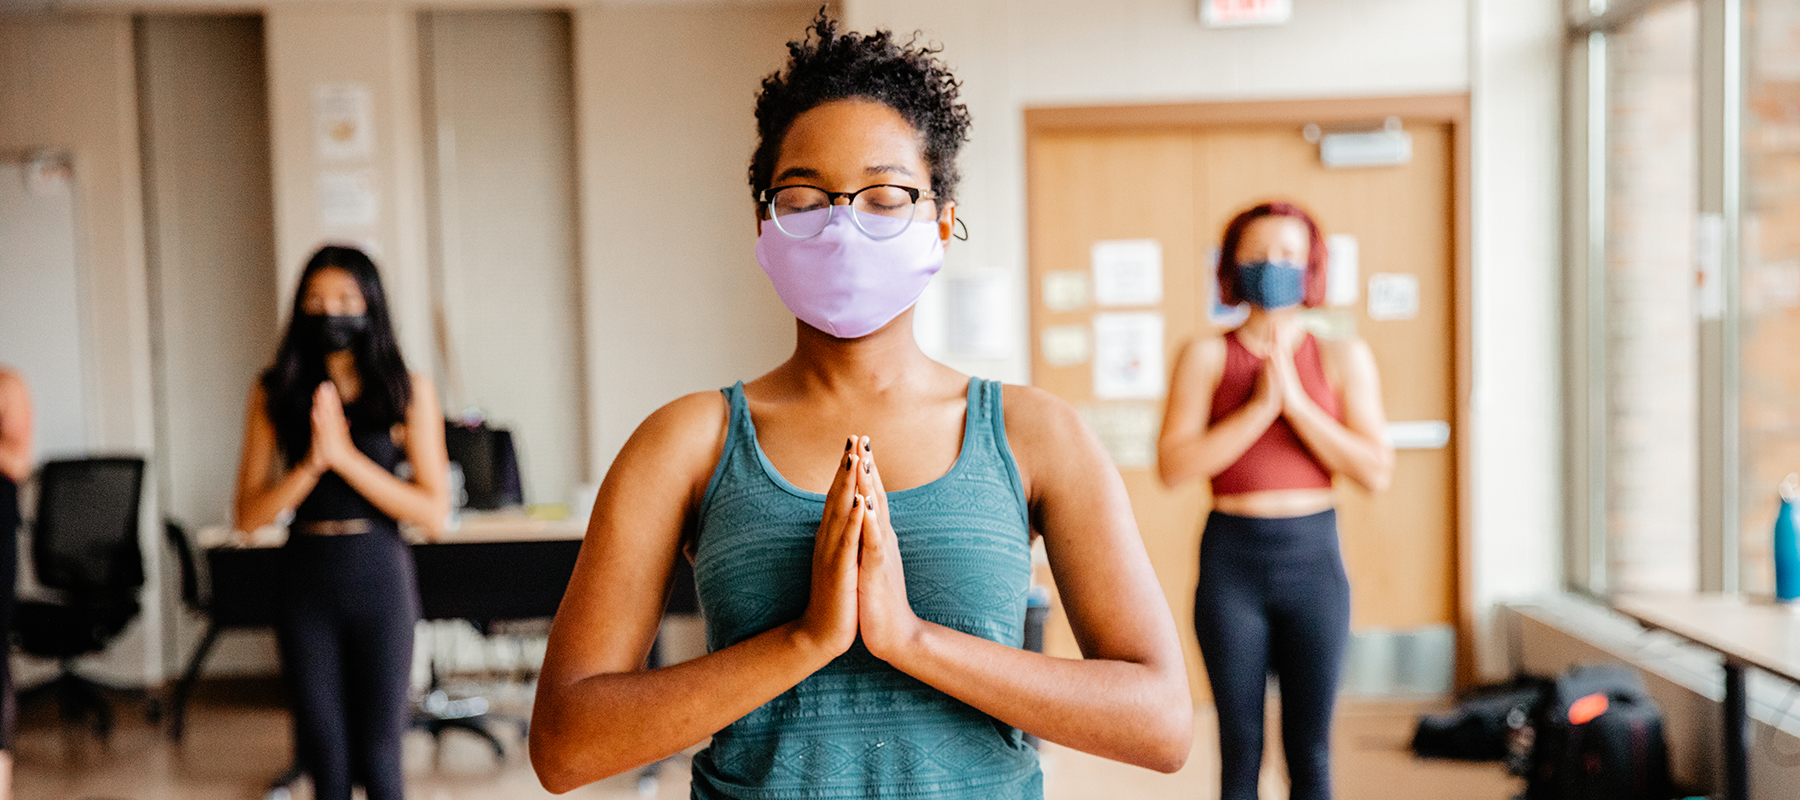 A Normandale student in a mask practices yoga.